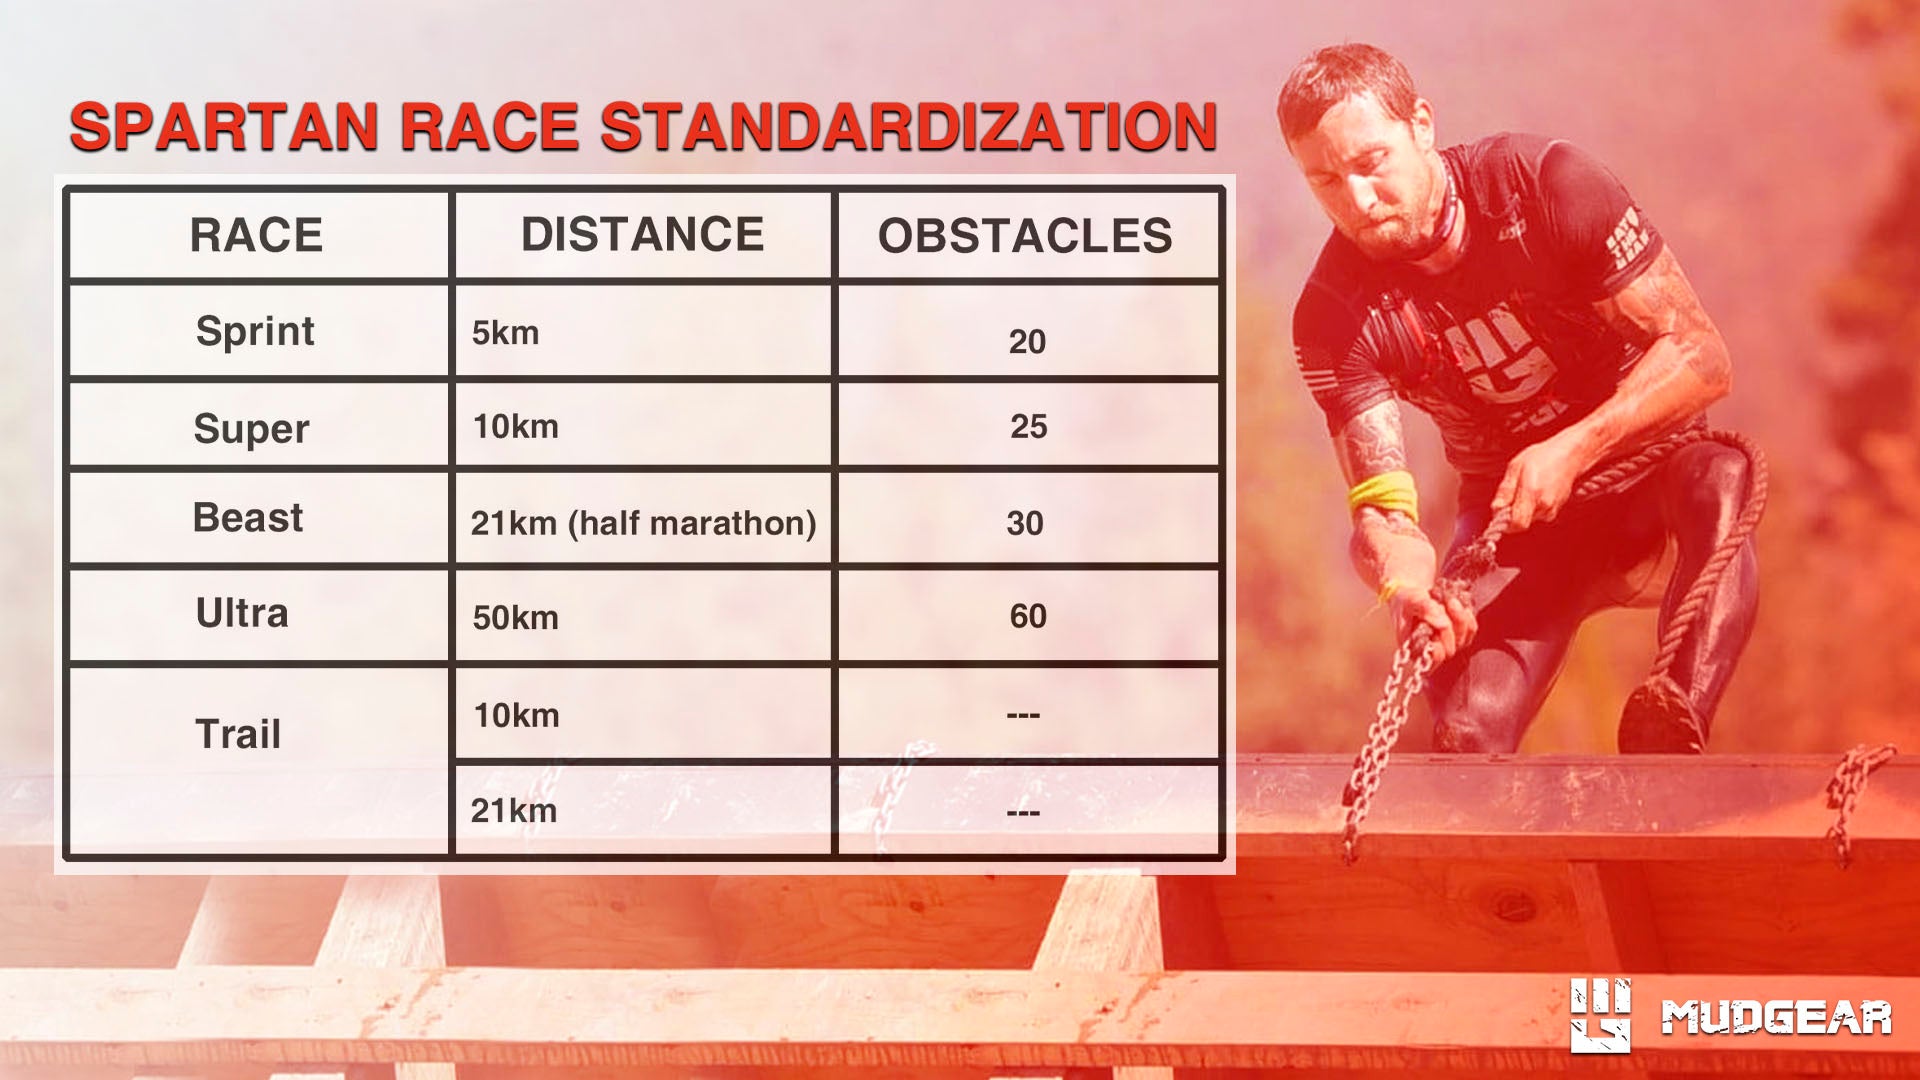 Table of Spartan Race Standardized Distance and Number of Obstacles